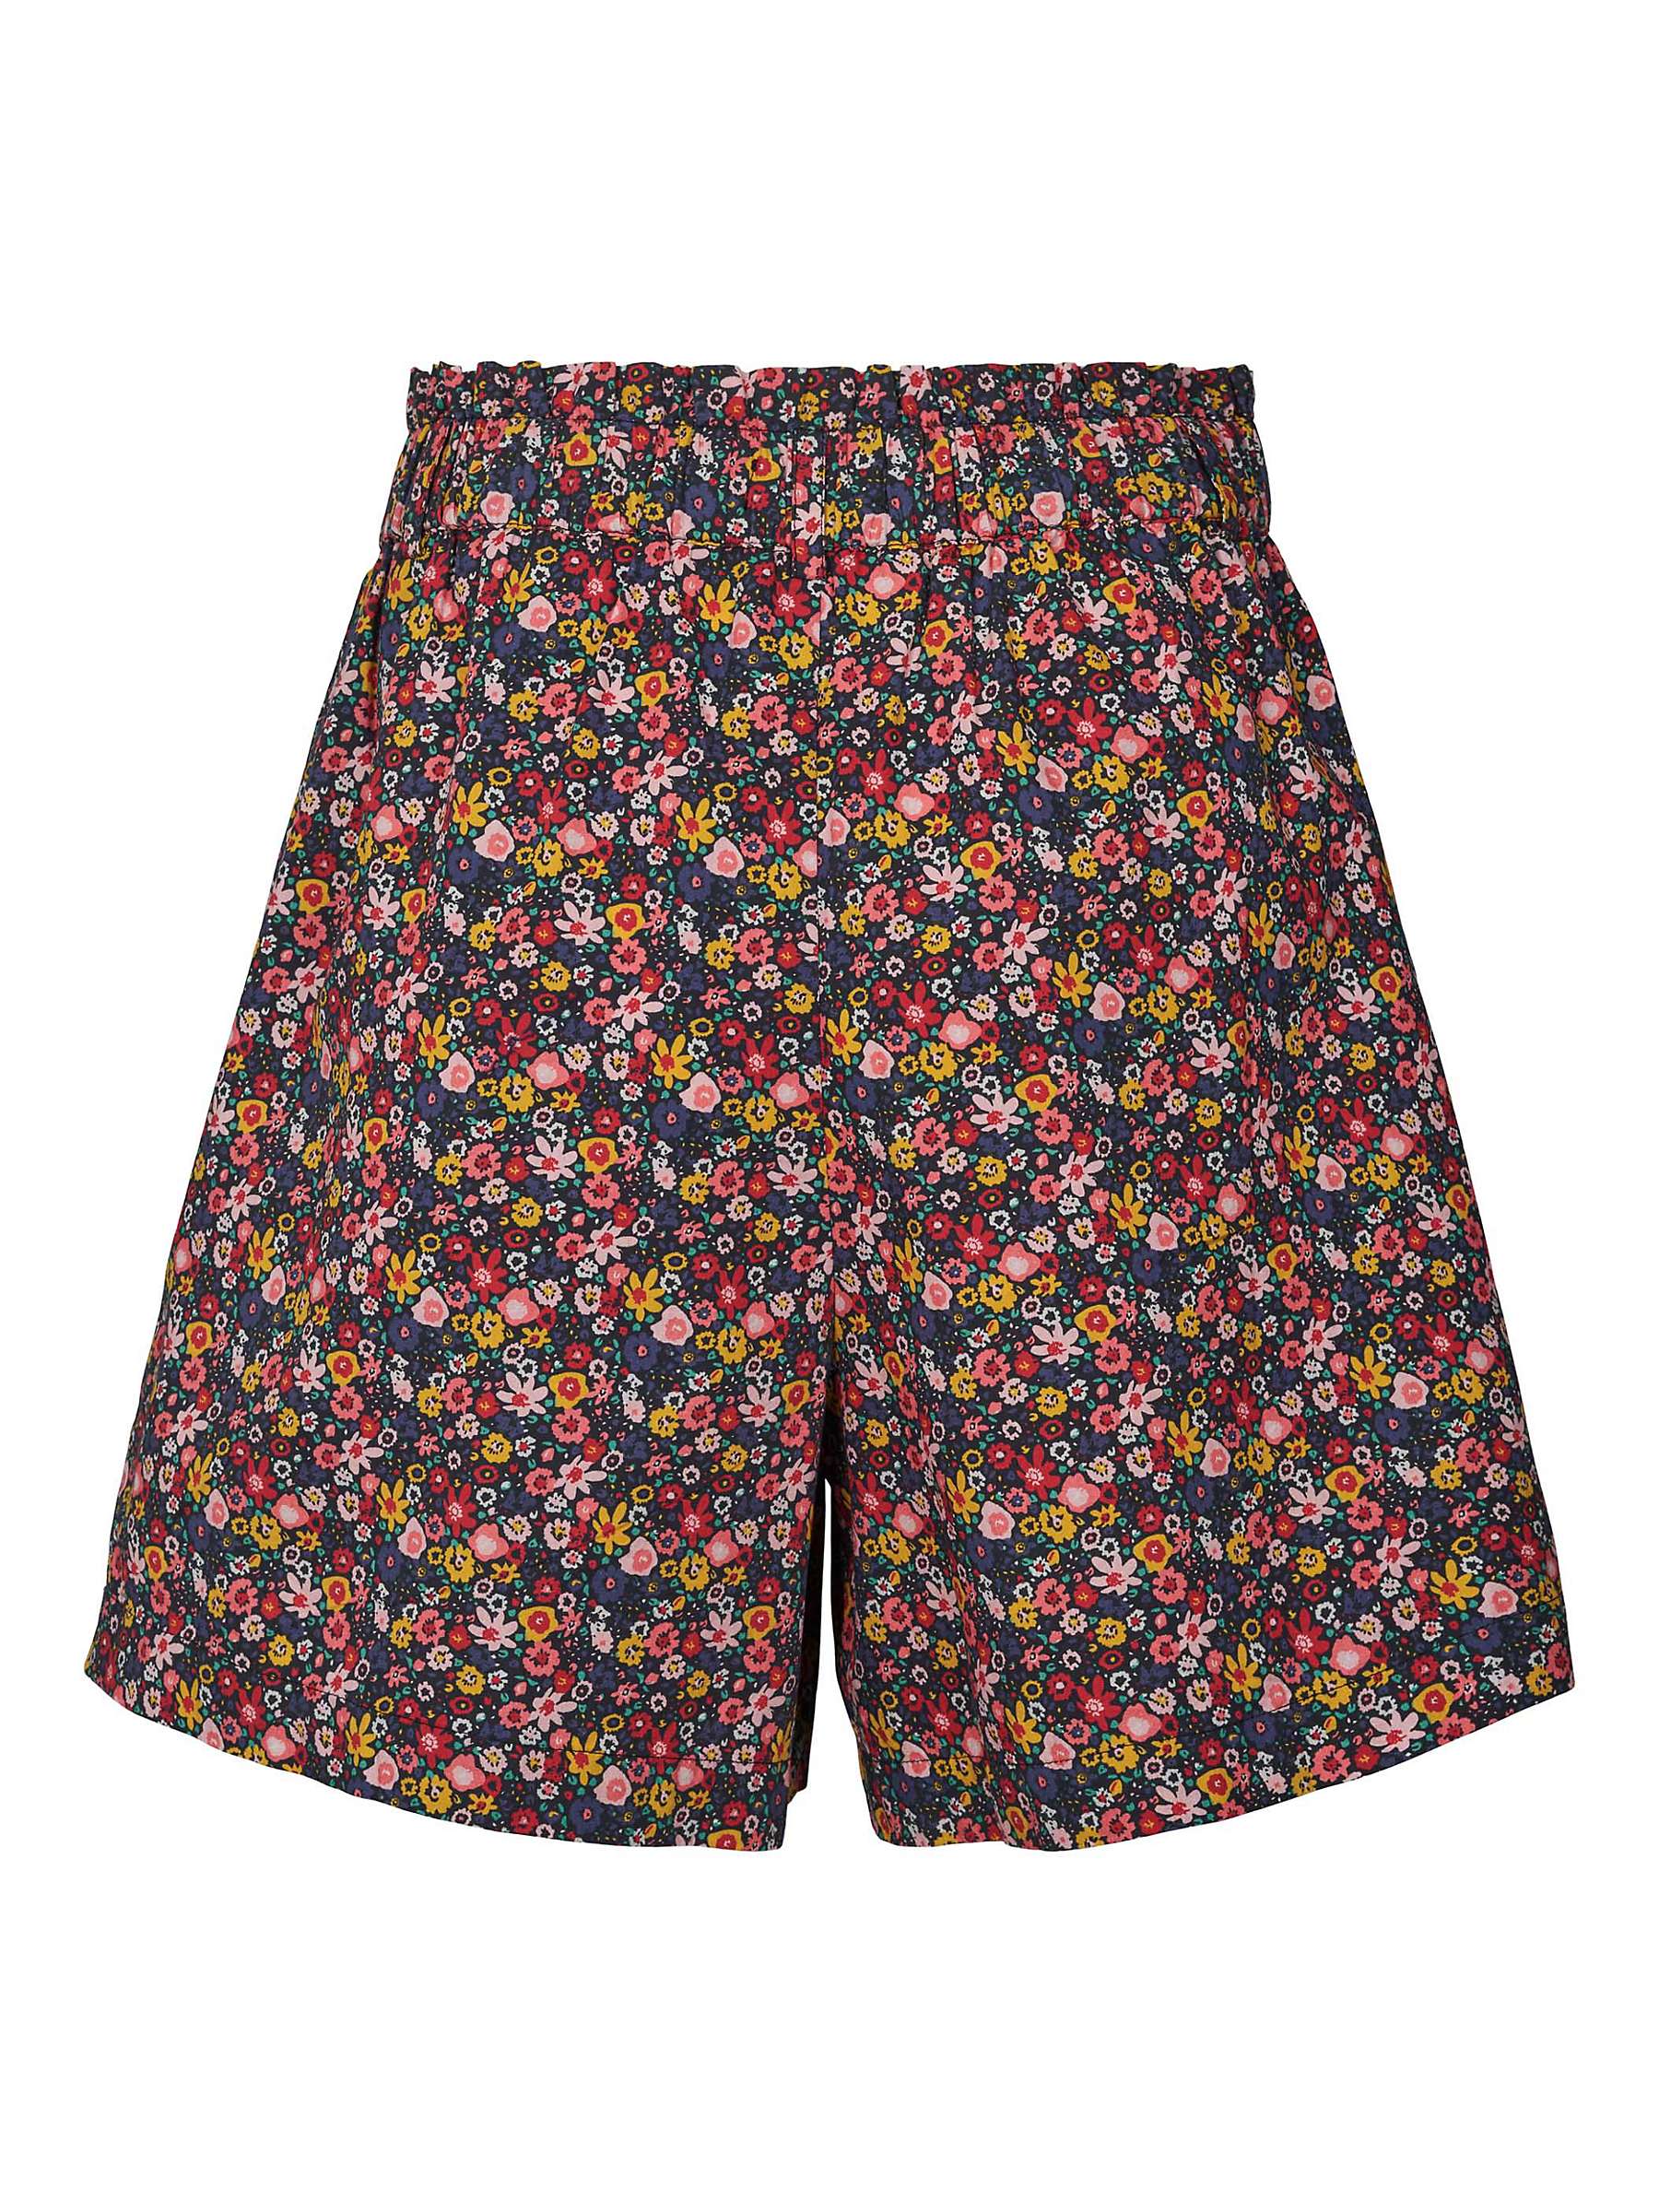 Buy Lollys Laundry Floral Print Blanca Shorts, Multi Online at johnlewis.com